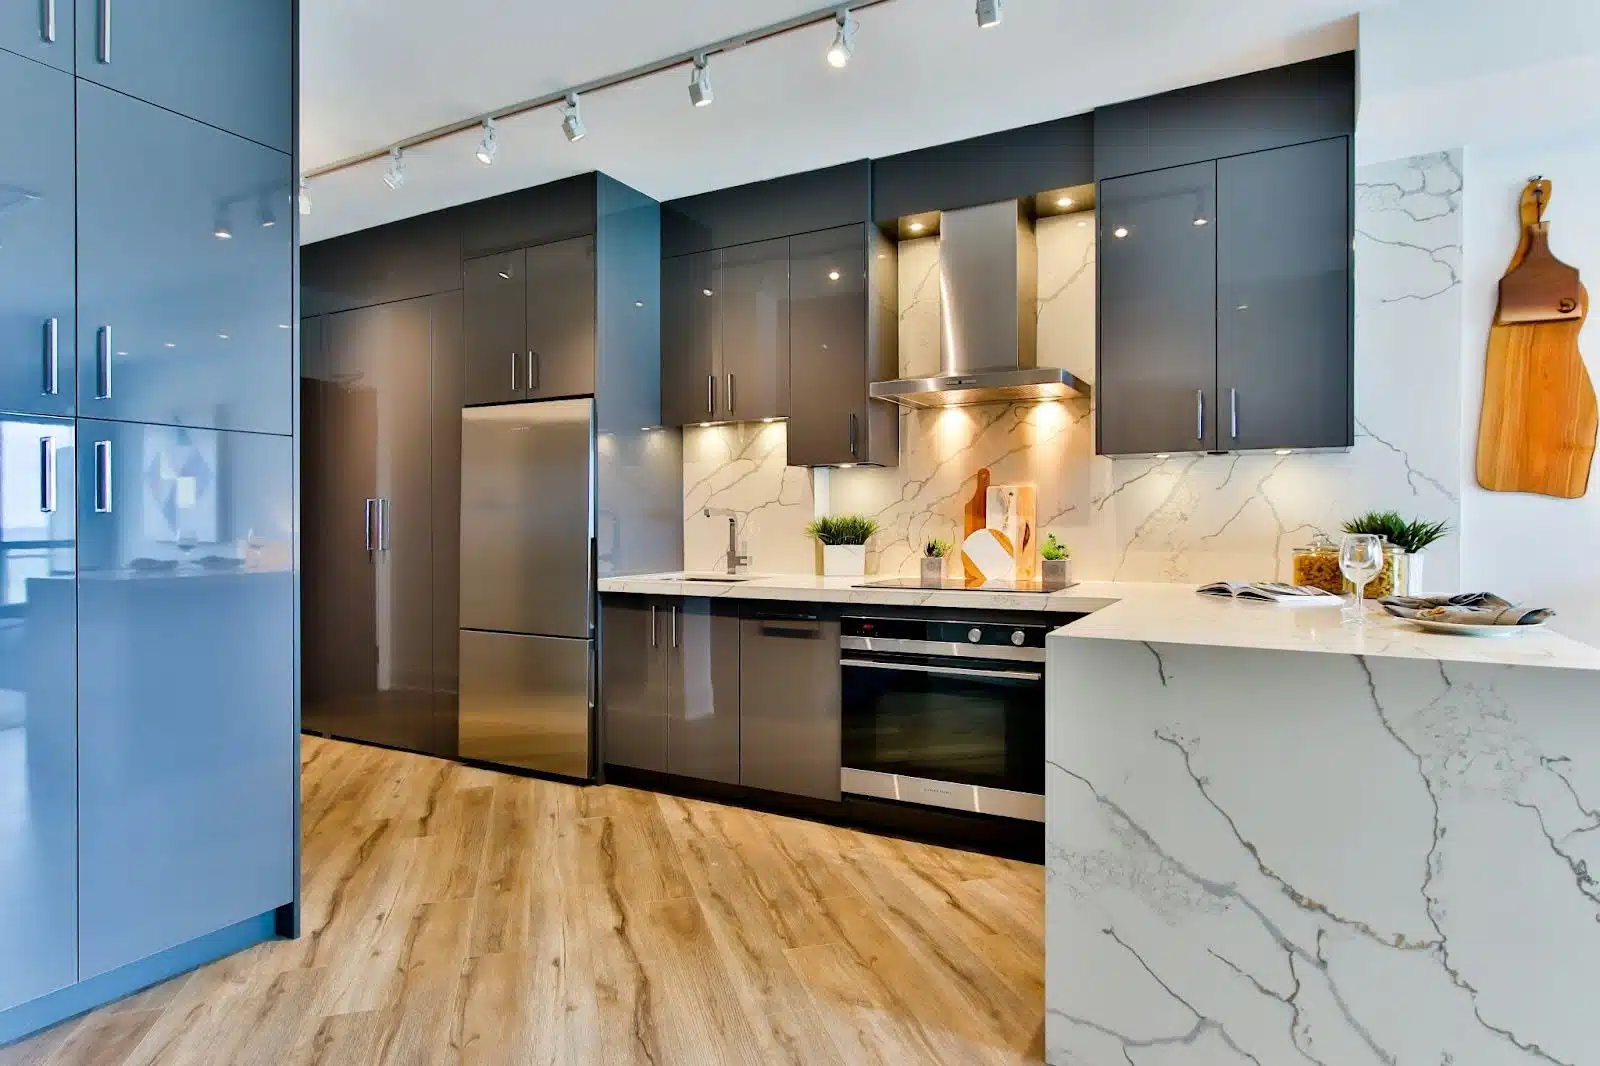 A contemporary kitchen featuring sleek marble countertops and backsplash, complemented by stylish slate gray and azure cabinets.